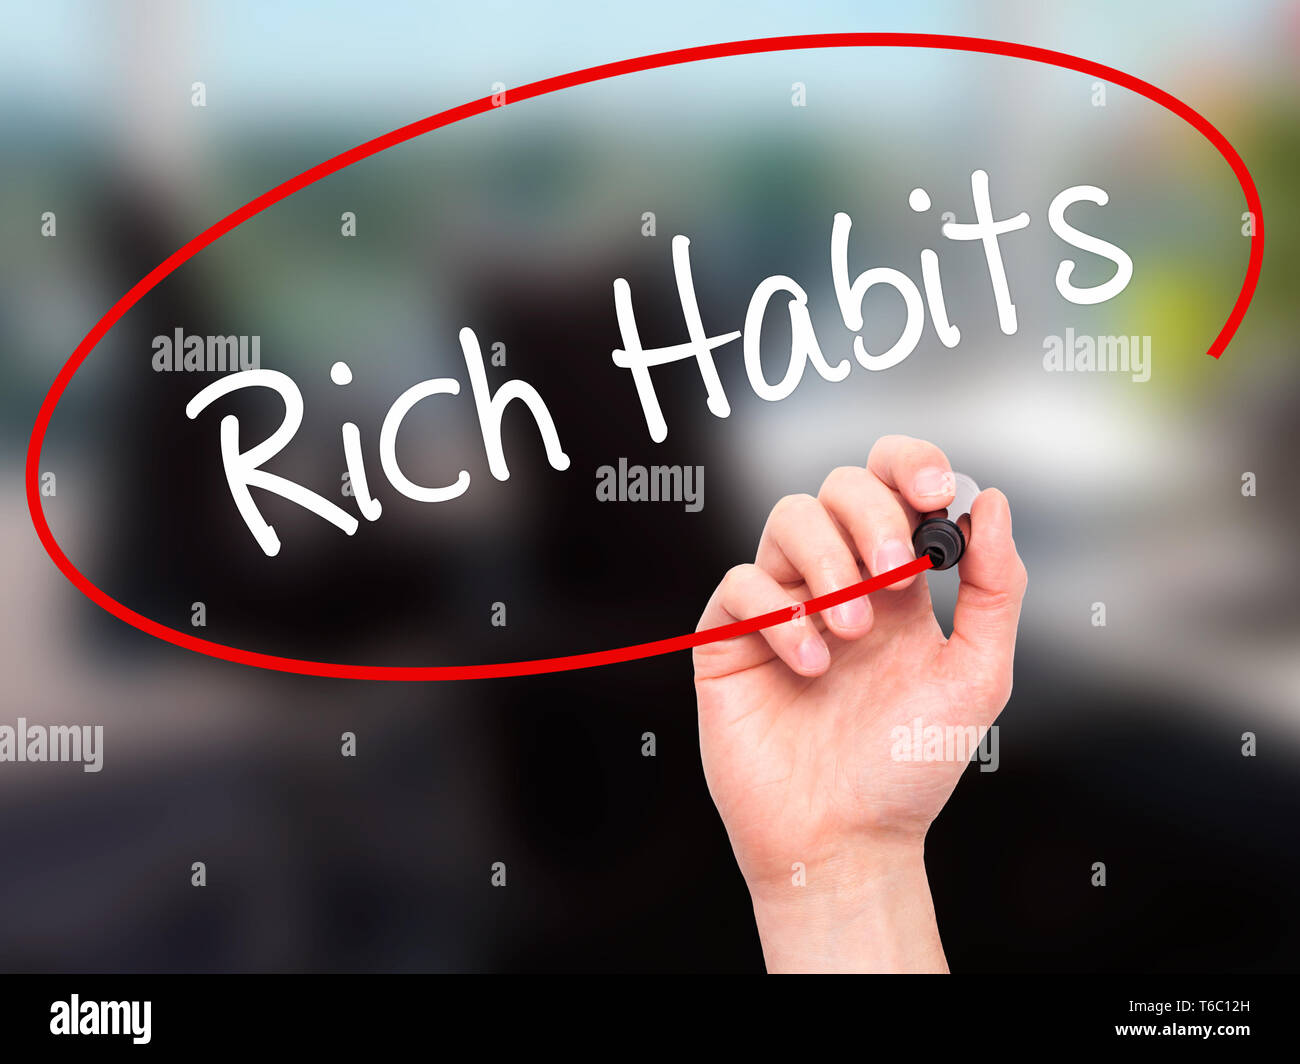 21 Habits to Achieve Wealth and Success - Marlies Cohen